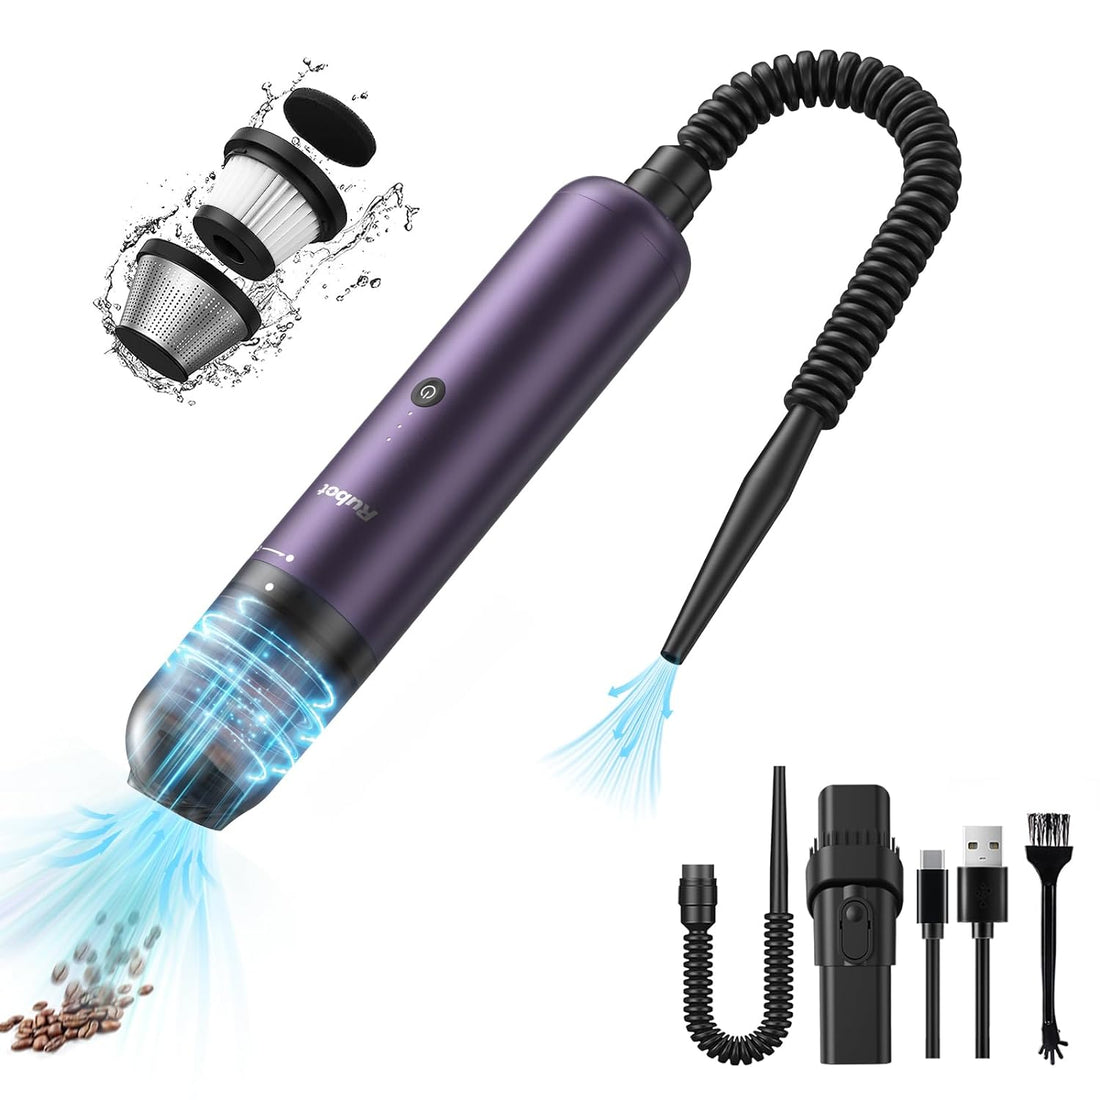 RUBOT Mini Vacuum Cleaner, Car Vacuum Portable, 16000PA Powerful Suction, USB Charging, Keyboard Cleaner, Cordless Handheld Vacuum for Car Home and Office, Purple（P12）